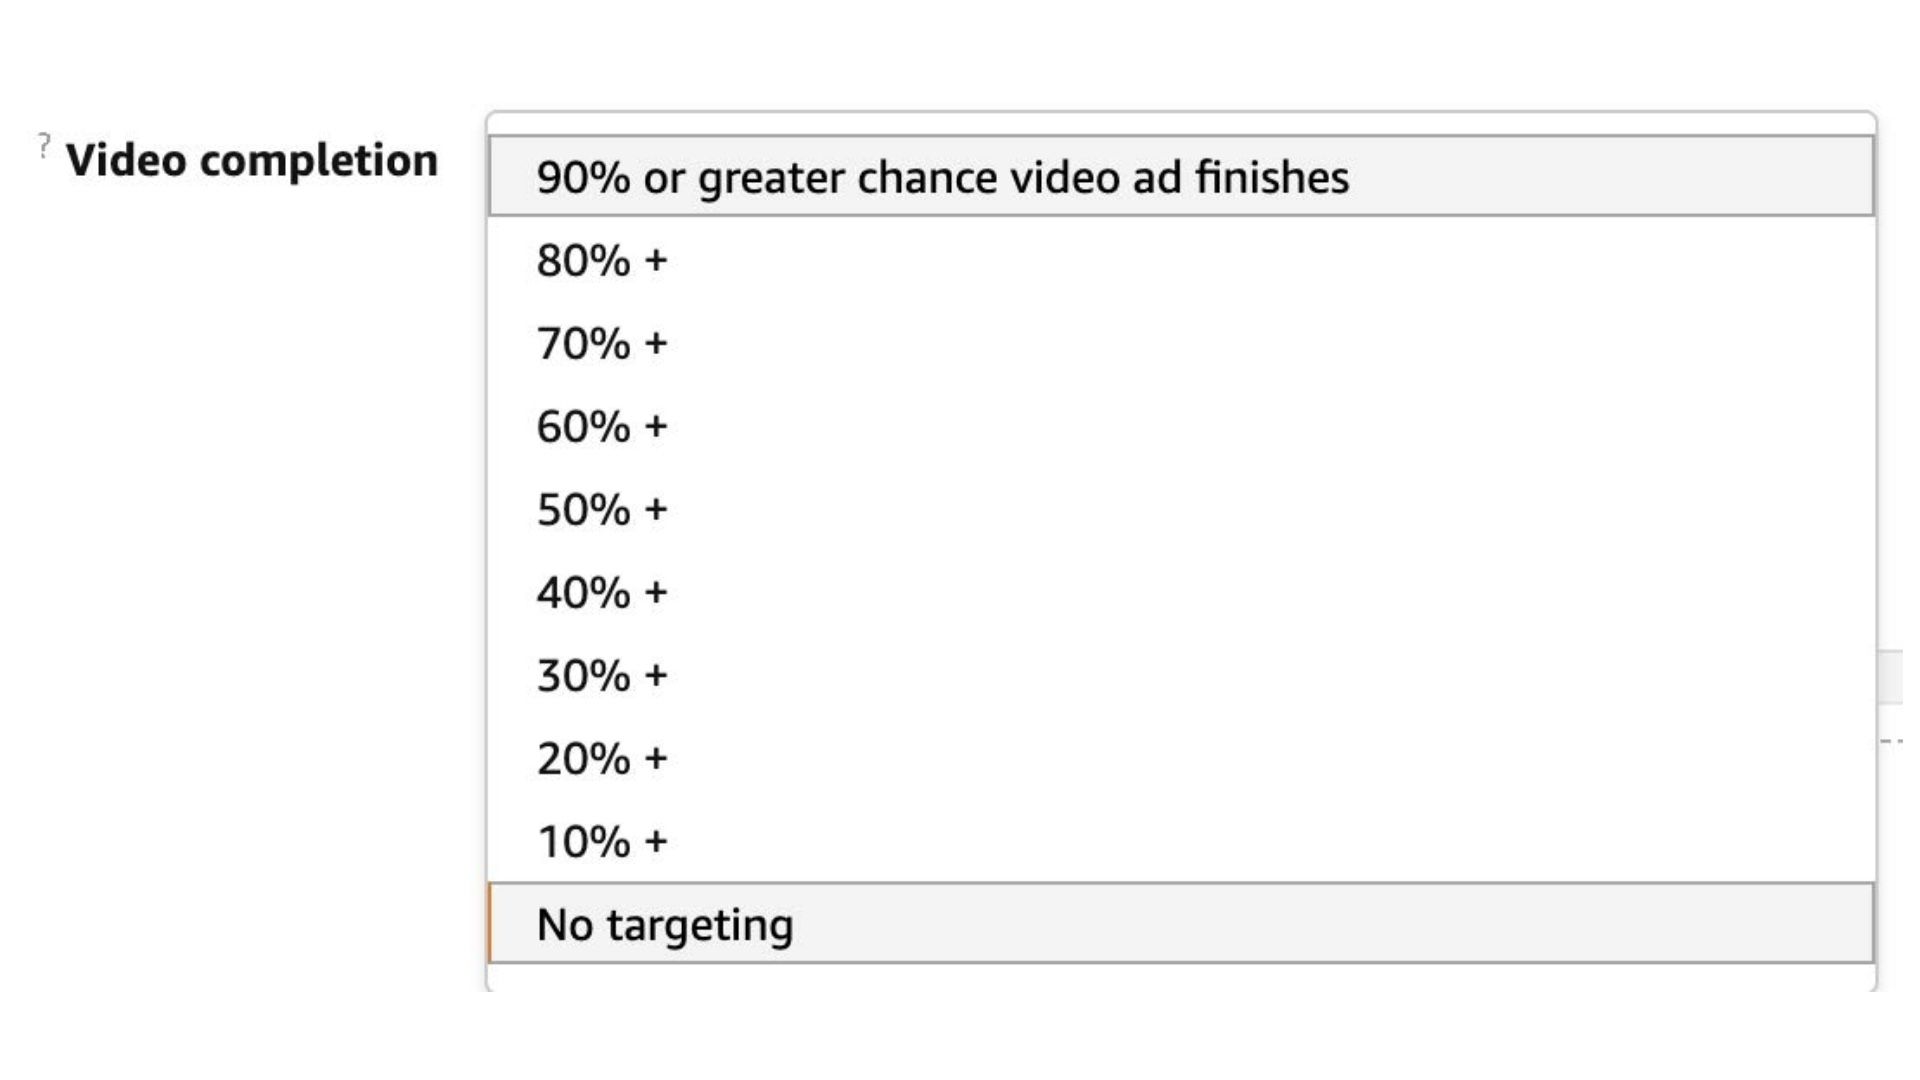 Amazon DSP introduces video completion targeting